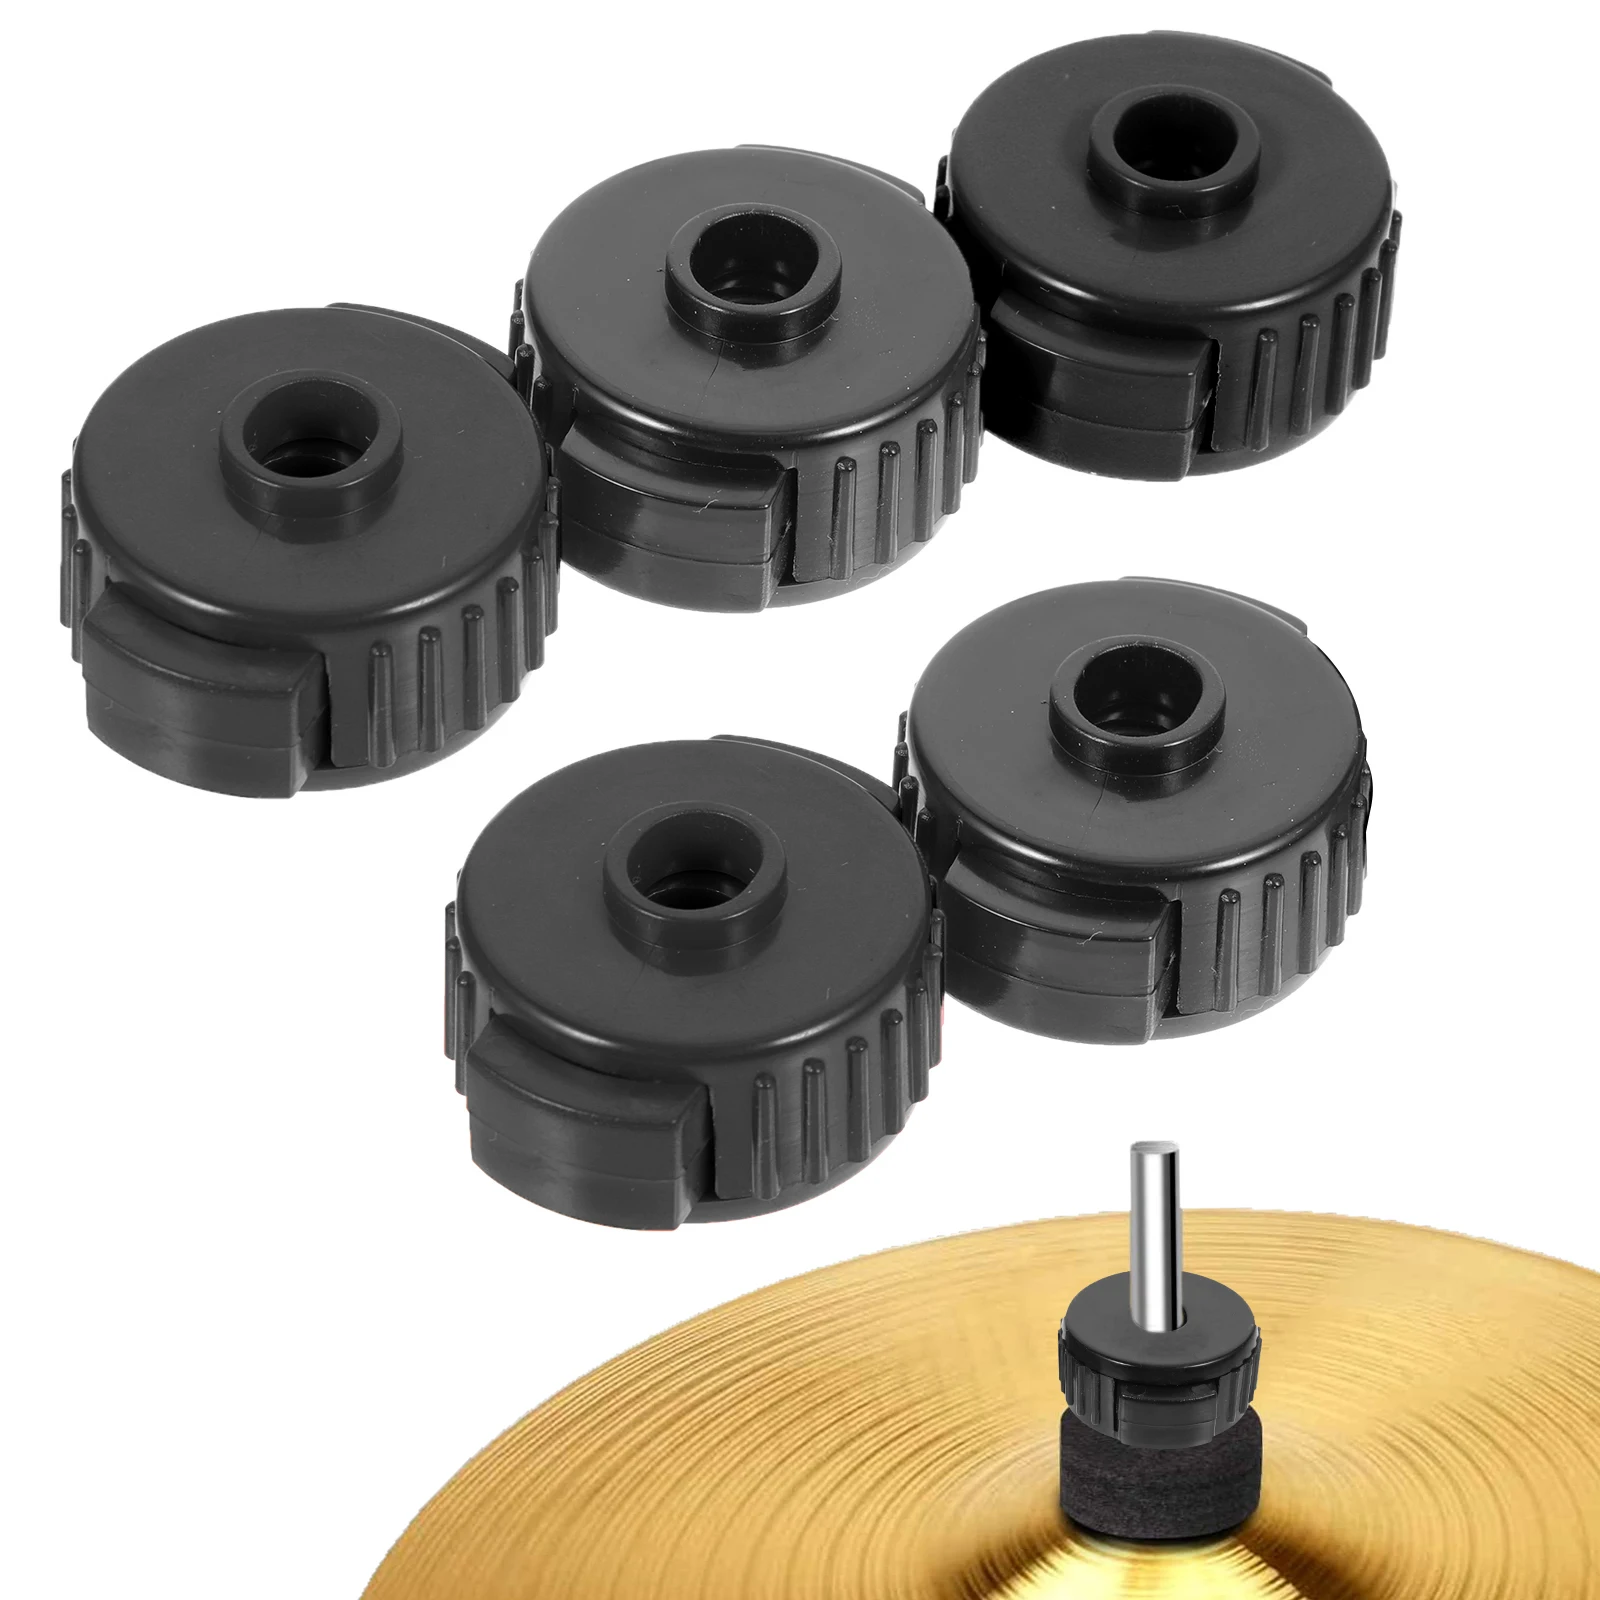 

5pcs Plastic Drum Quick Nuts Cymbal Nuts Quick Release Drum Accessories Kit Percussion Replacement Musical Instrument Parts